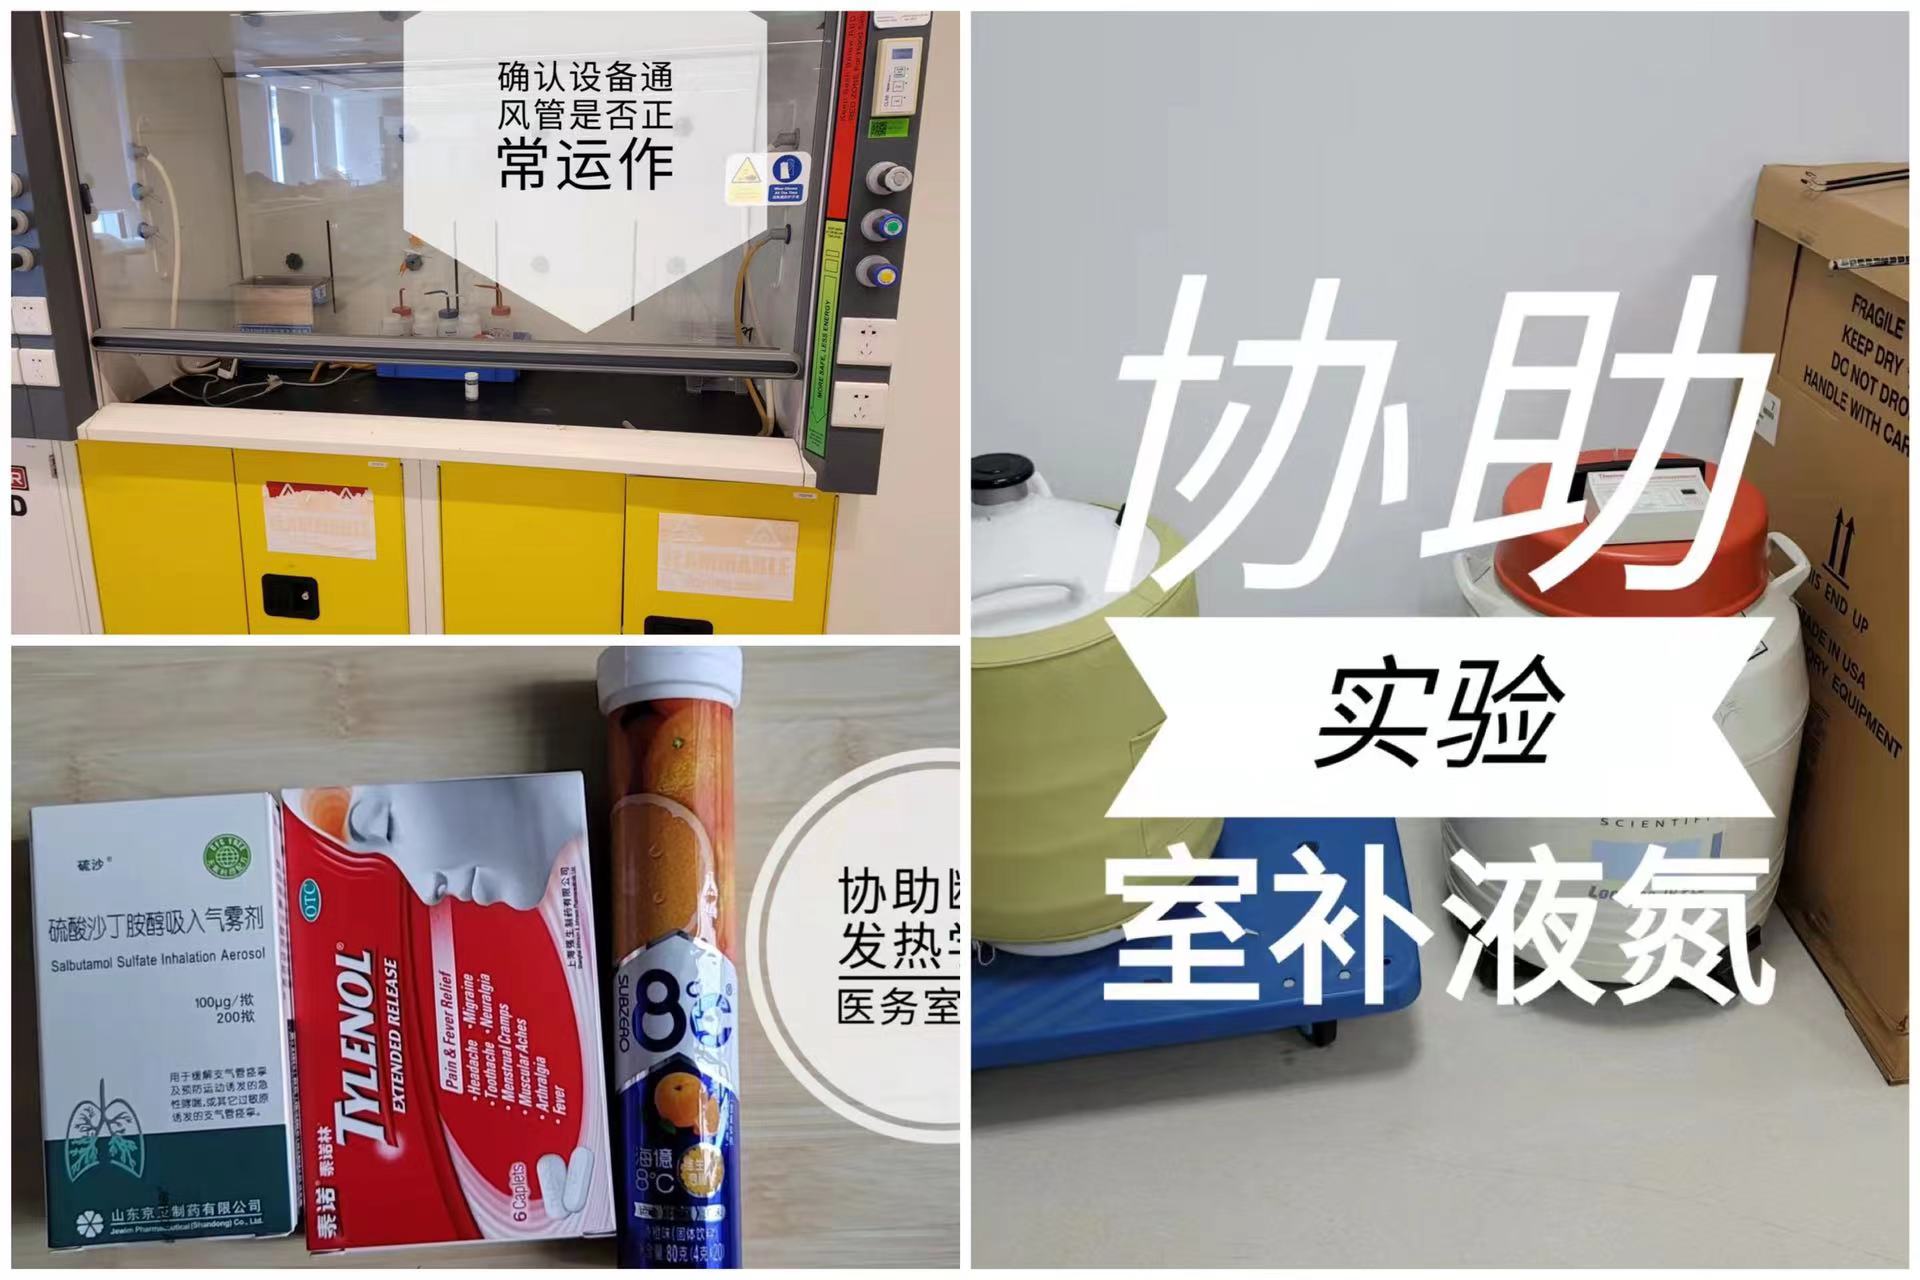 A collage of images of tasks Franklin Ying and his colleagues have been doing